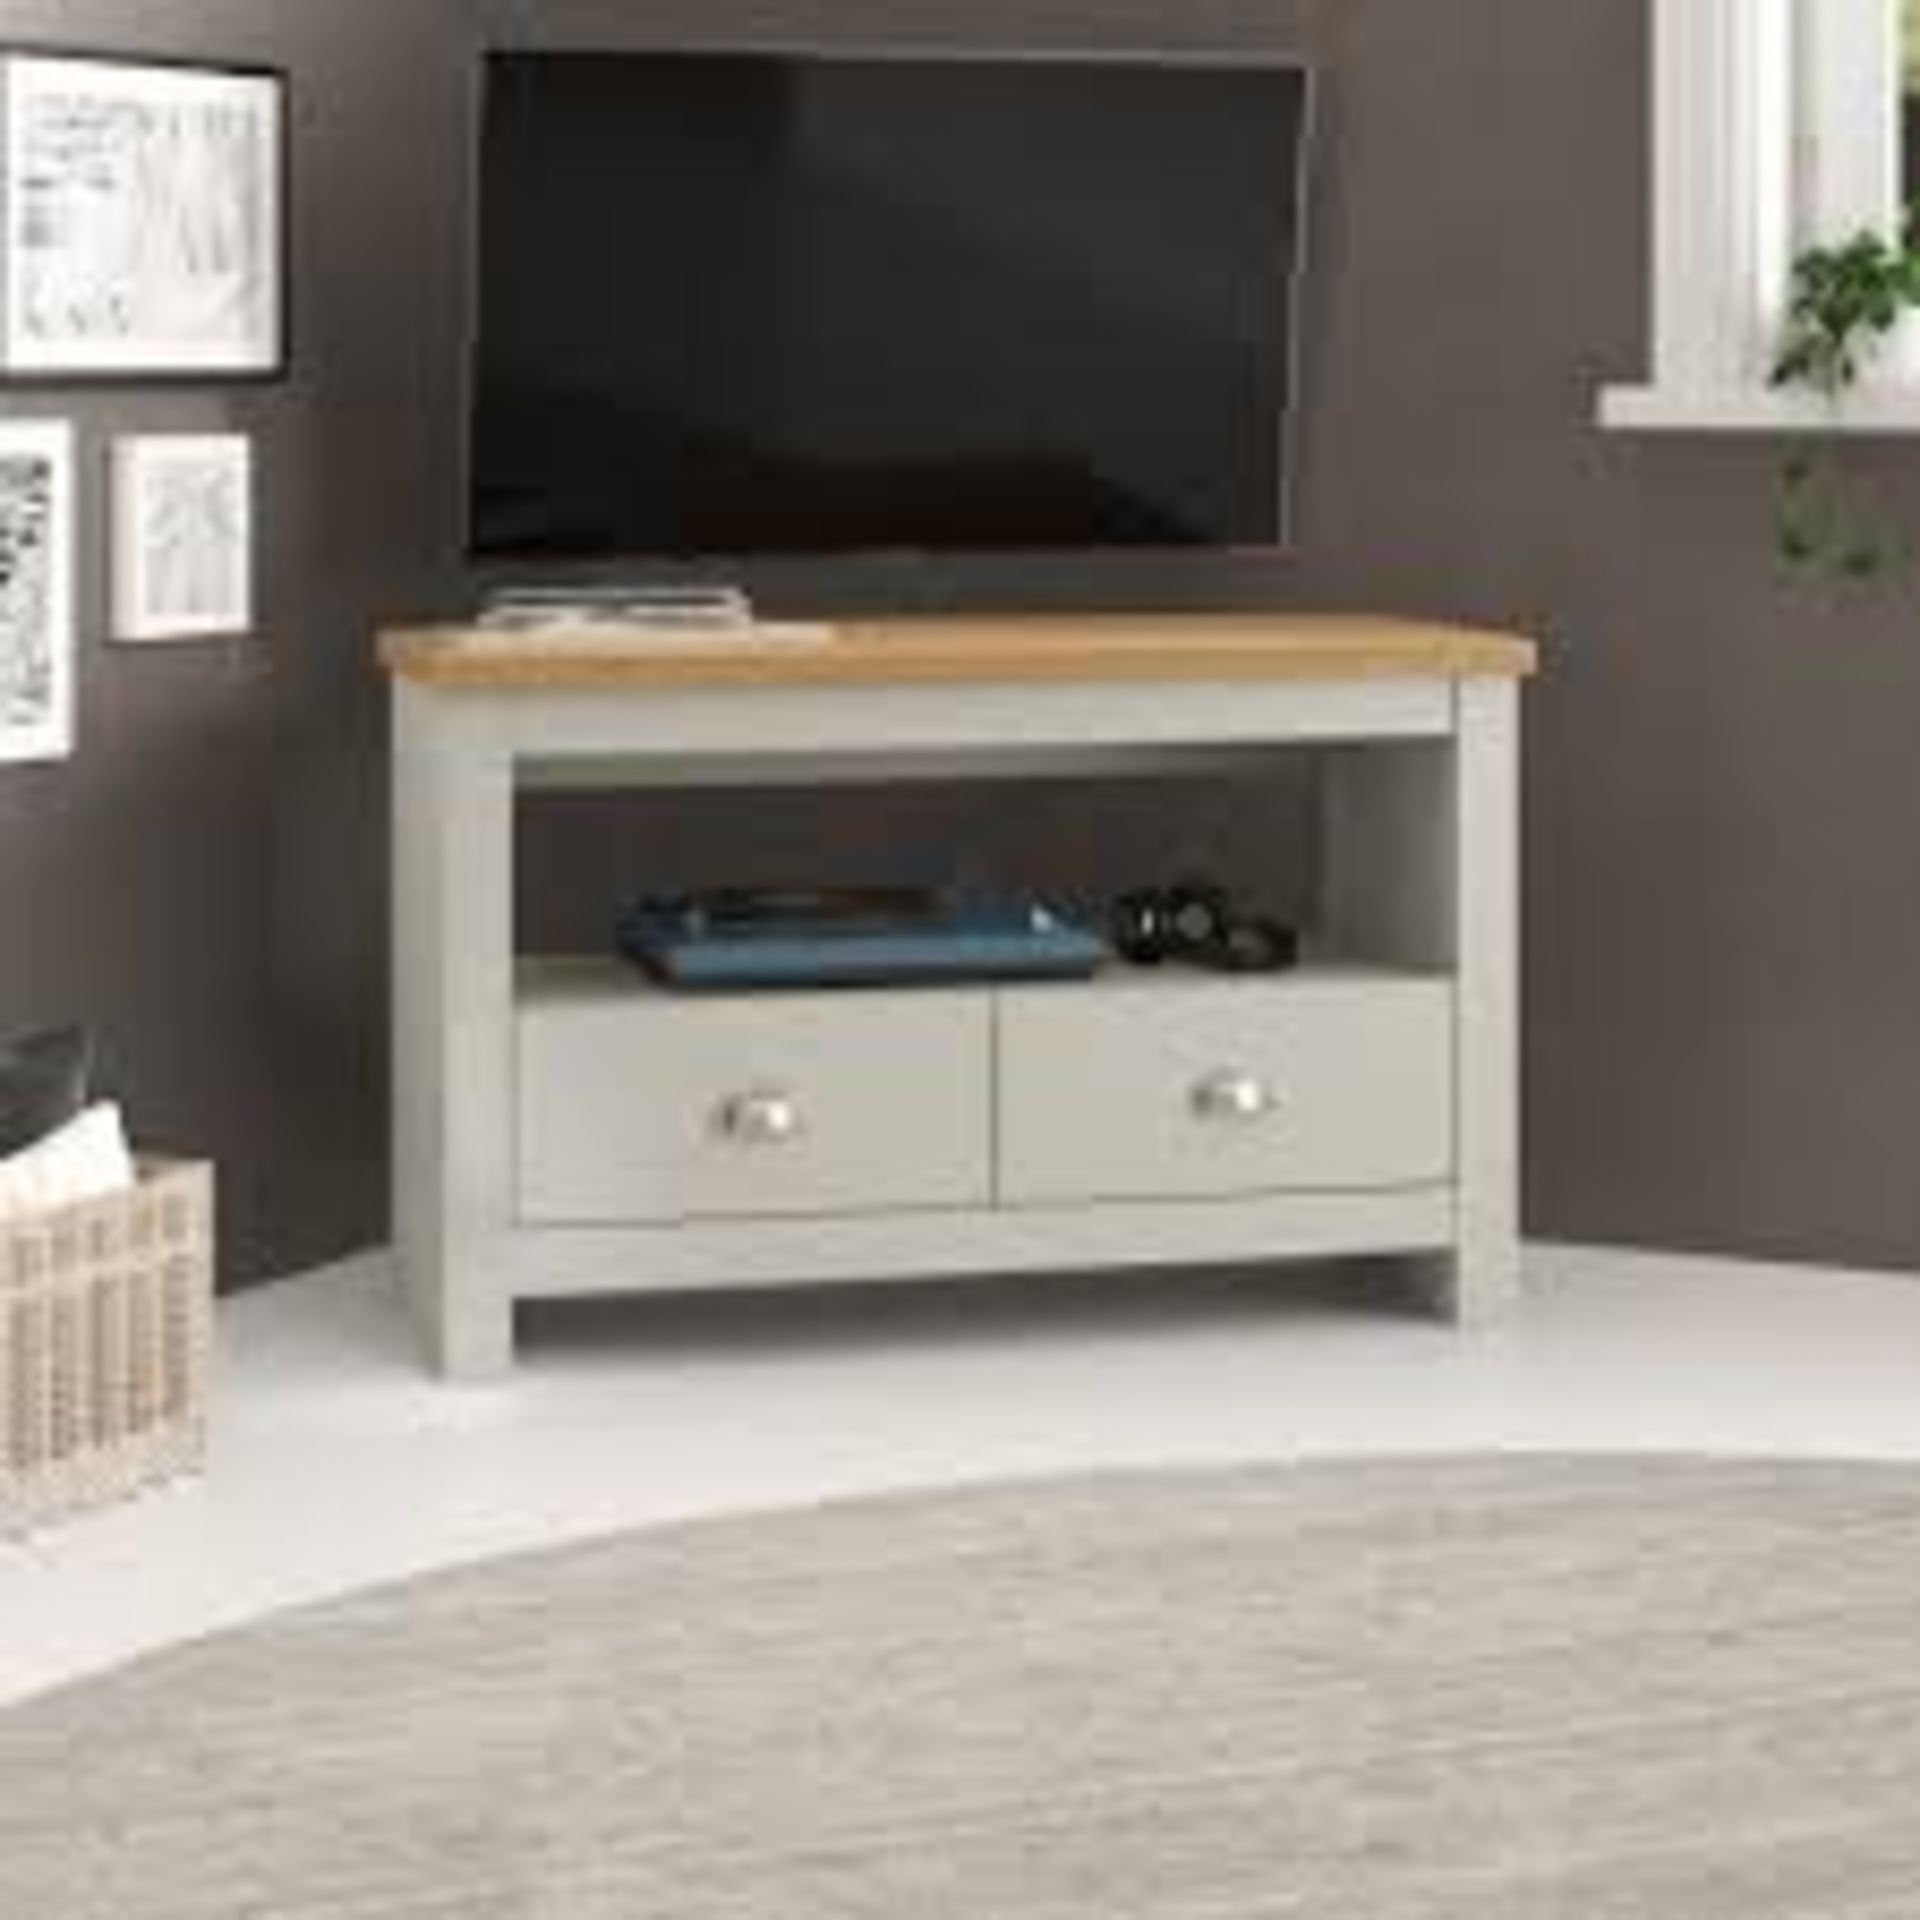 Boxed Zip Code Design Loretta TV Stand RRP £100 (16267) (Pictures Are For Illustration Purposes